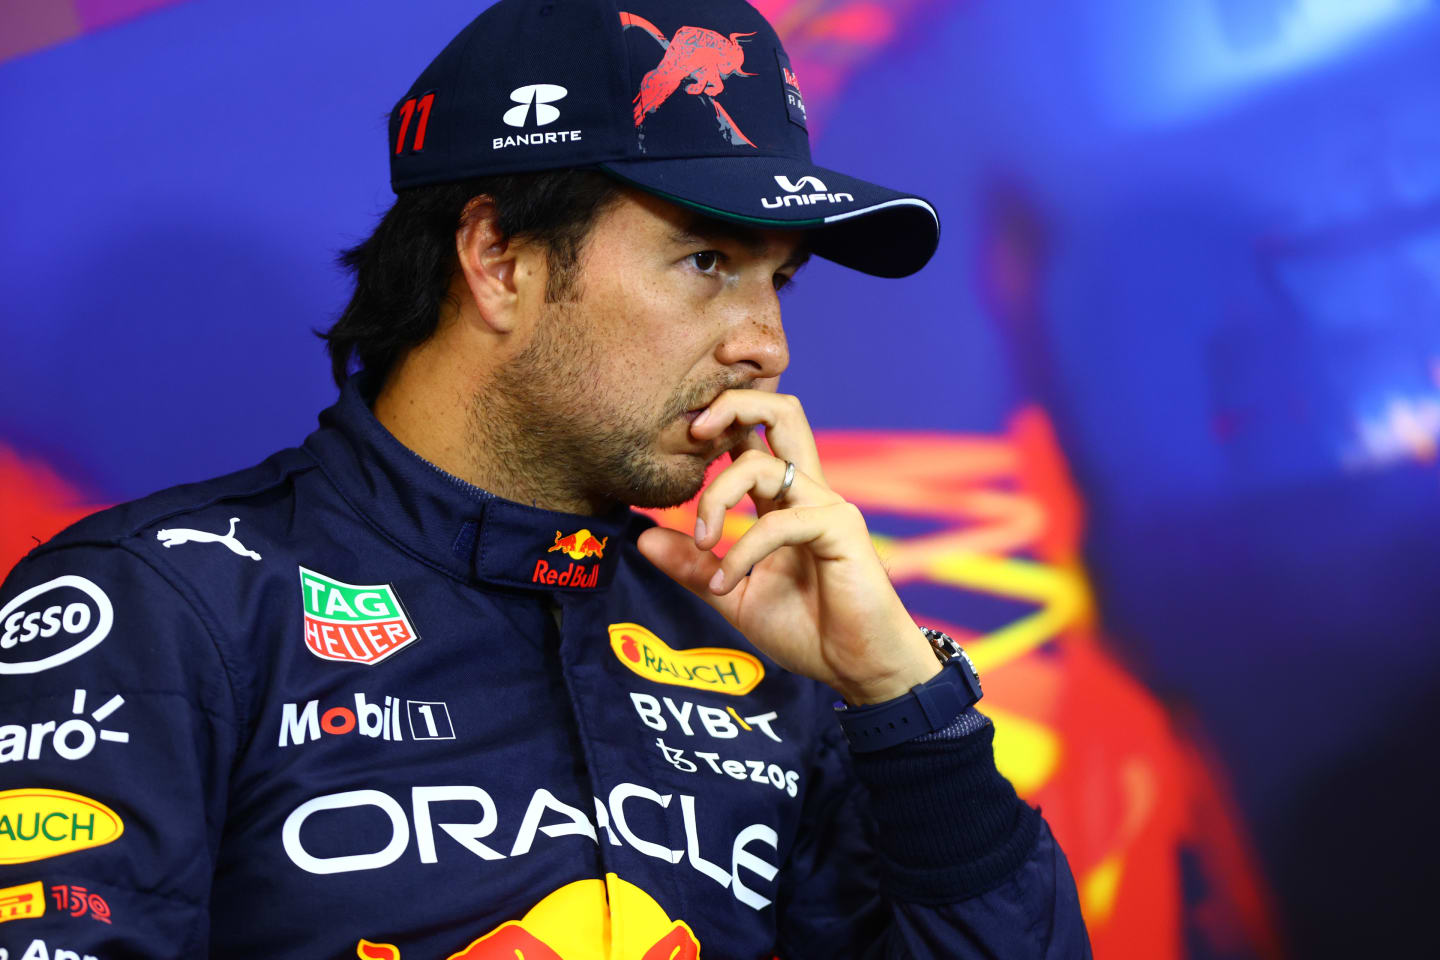 SPA, BELGIUM - AUGUST 27: Third placed qualifier Sergio Perez of Mexico and Oracle Red Bull Racing attends the press conference after qualifying ahead of the F1 Grand Prix of Belgium at Circuit de Spa-Francorchamps on August 27, 2022 in Spa, Belgium. (Photo by Dan Istitene/Getty Images)